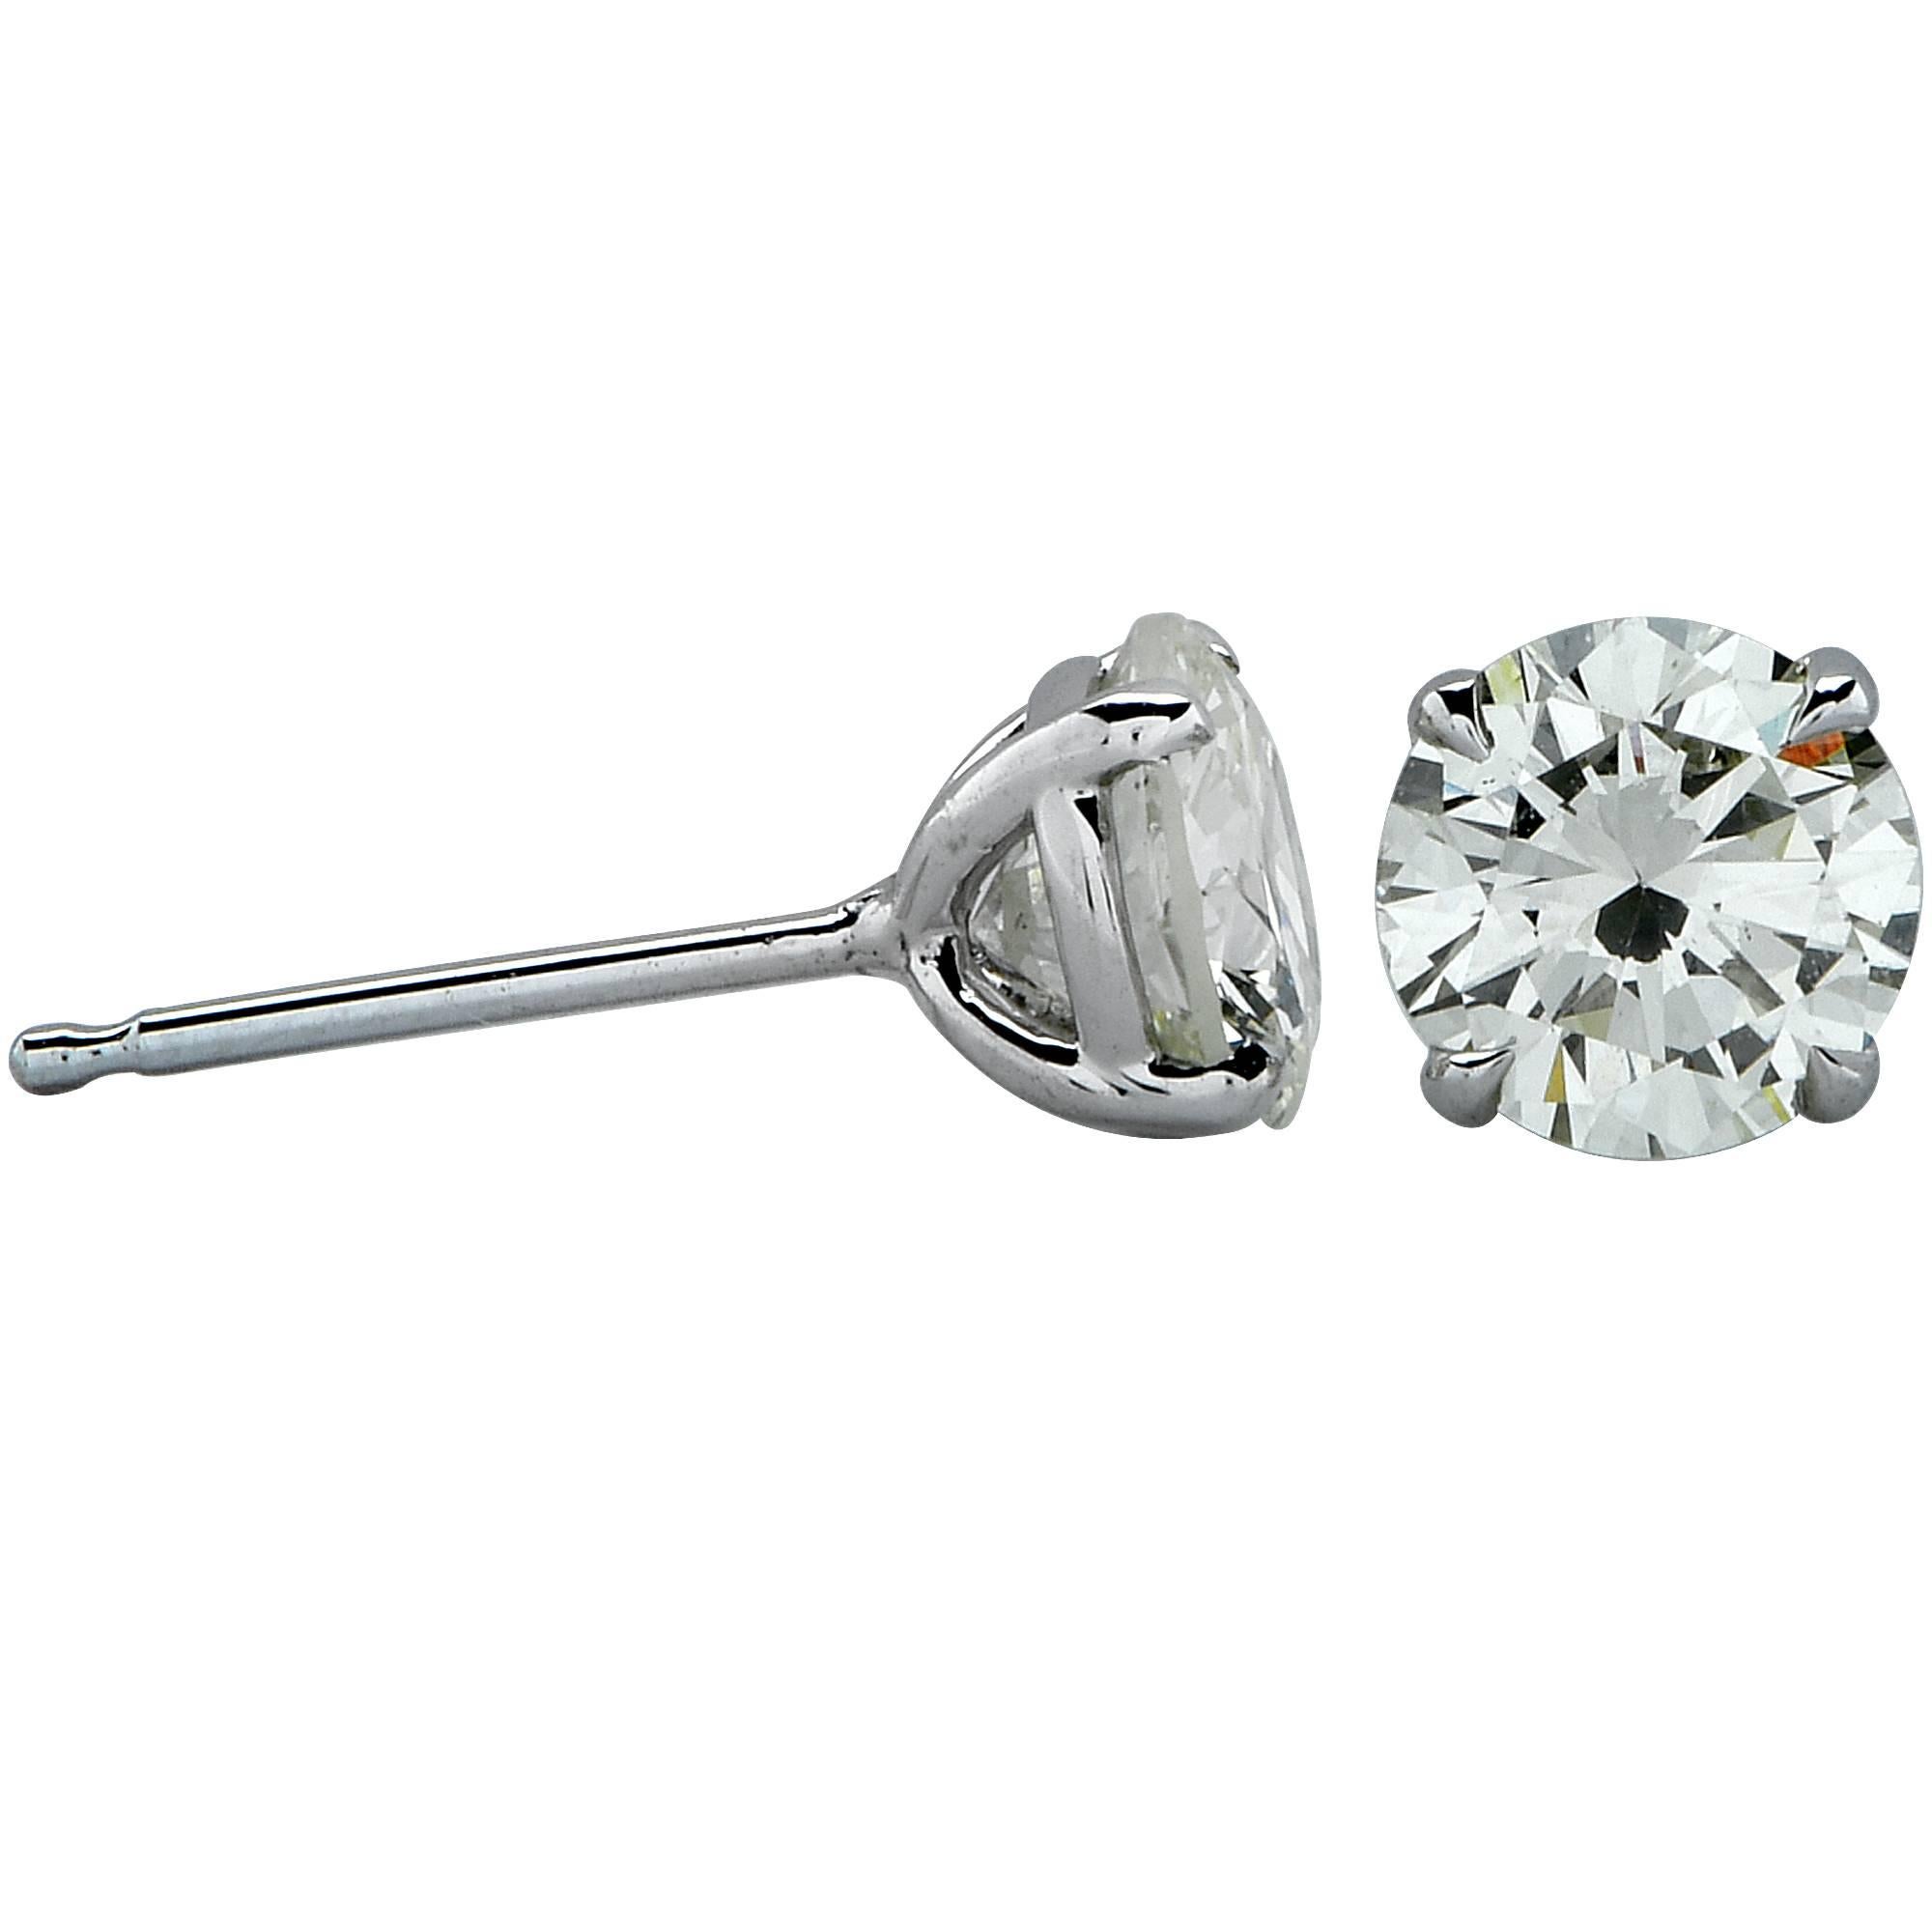 18k white gold 1.39 carat total weight diamond solitaire stud earrings featuring a matching .71ct round brilliant cut diamond L-M color and VS in clarity and .68ct round brilliant cut diamond L-M color and VS in clarity.

Measurements are available